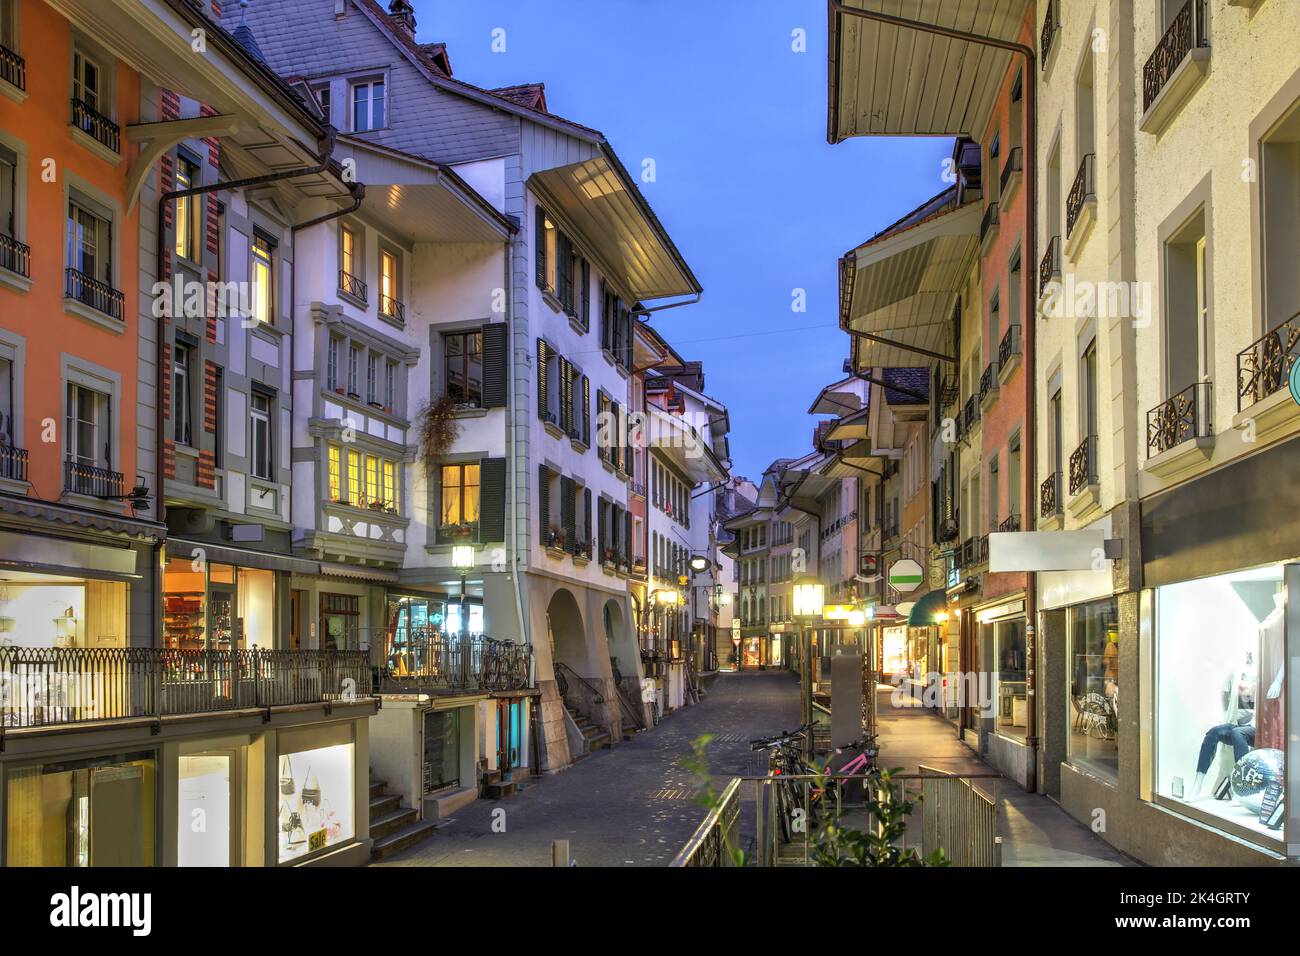 Historic Obere Hauptstrasse (Street) in the old town of Thun, Bern Canton, Switzerland. The commercial street runs parallel to the Aare river and is p Stock Photo